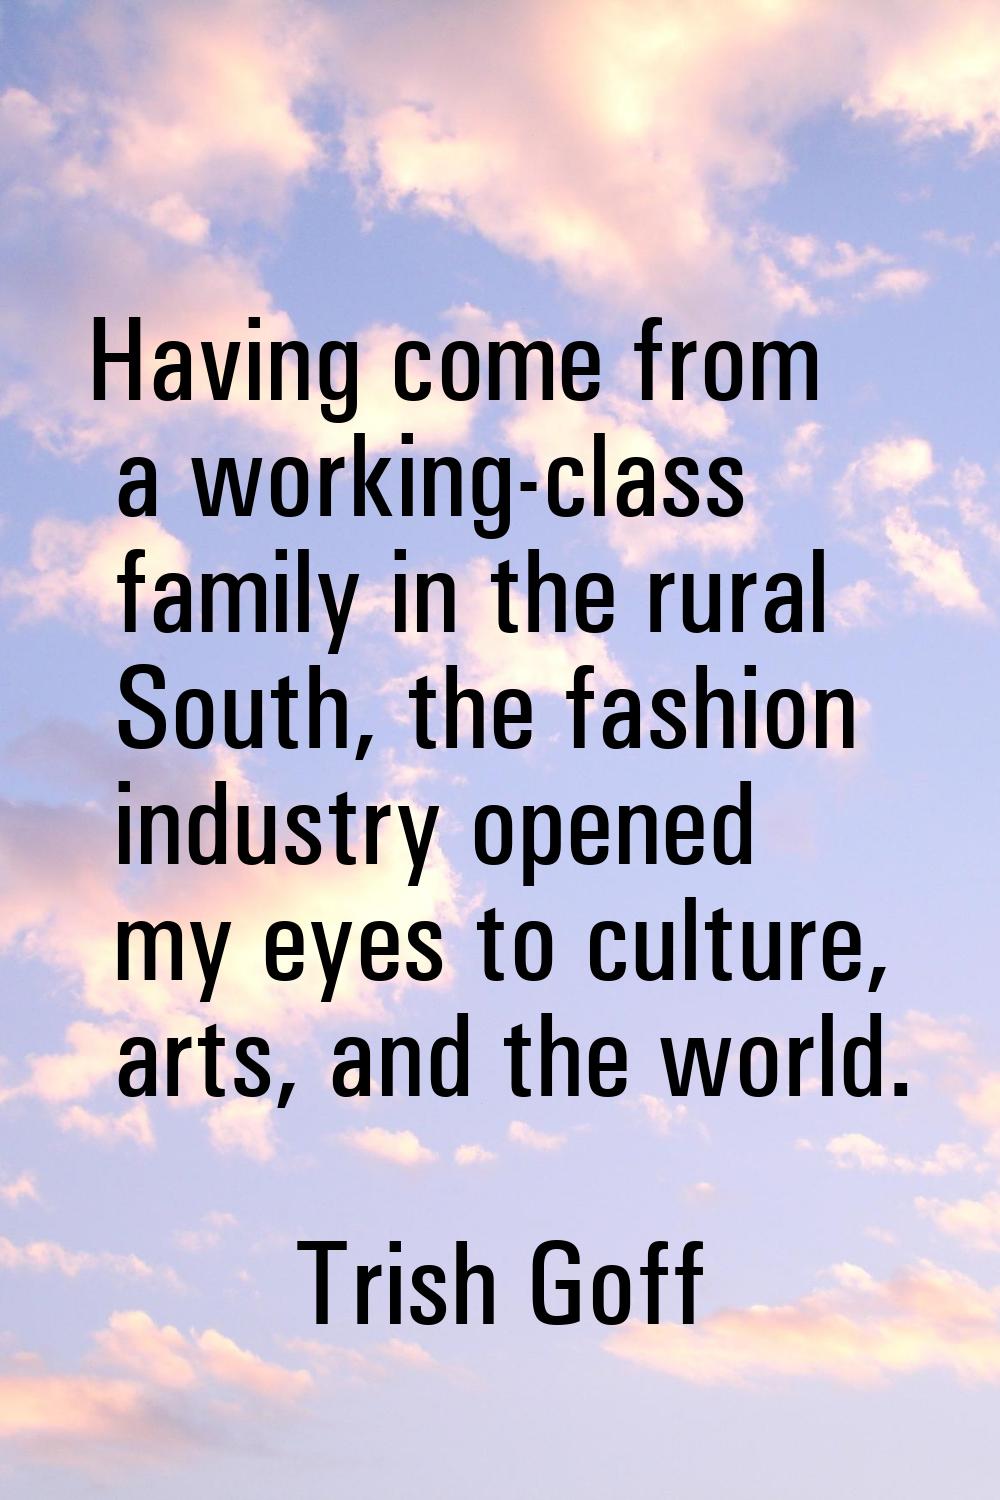 Having come from a working-class family in the rural South, the fashion industry opened my eyes to 